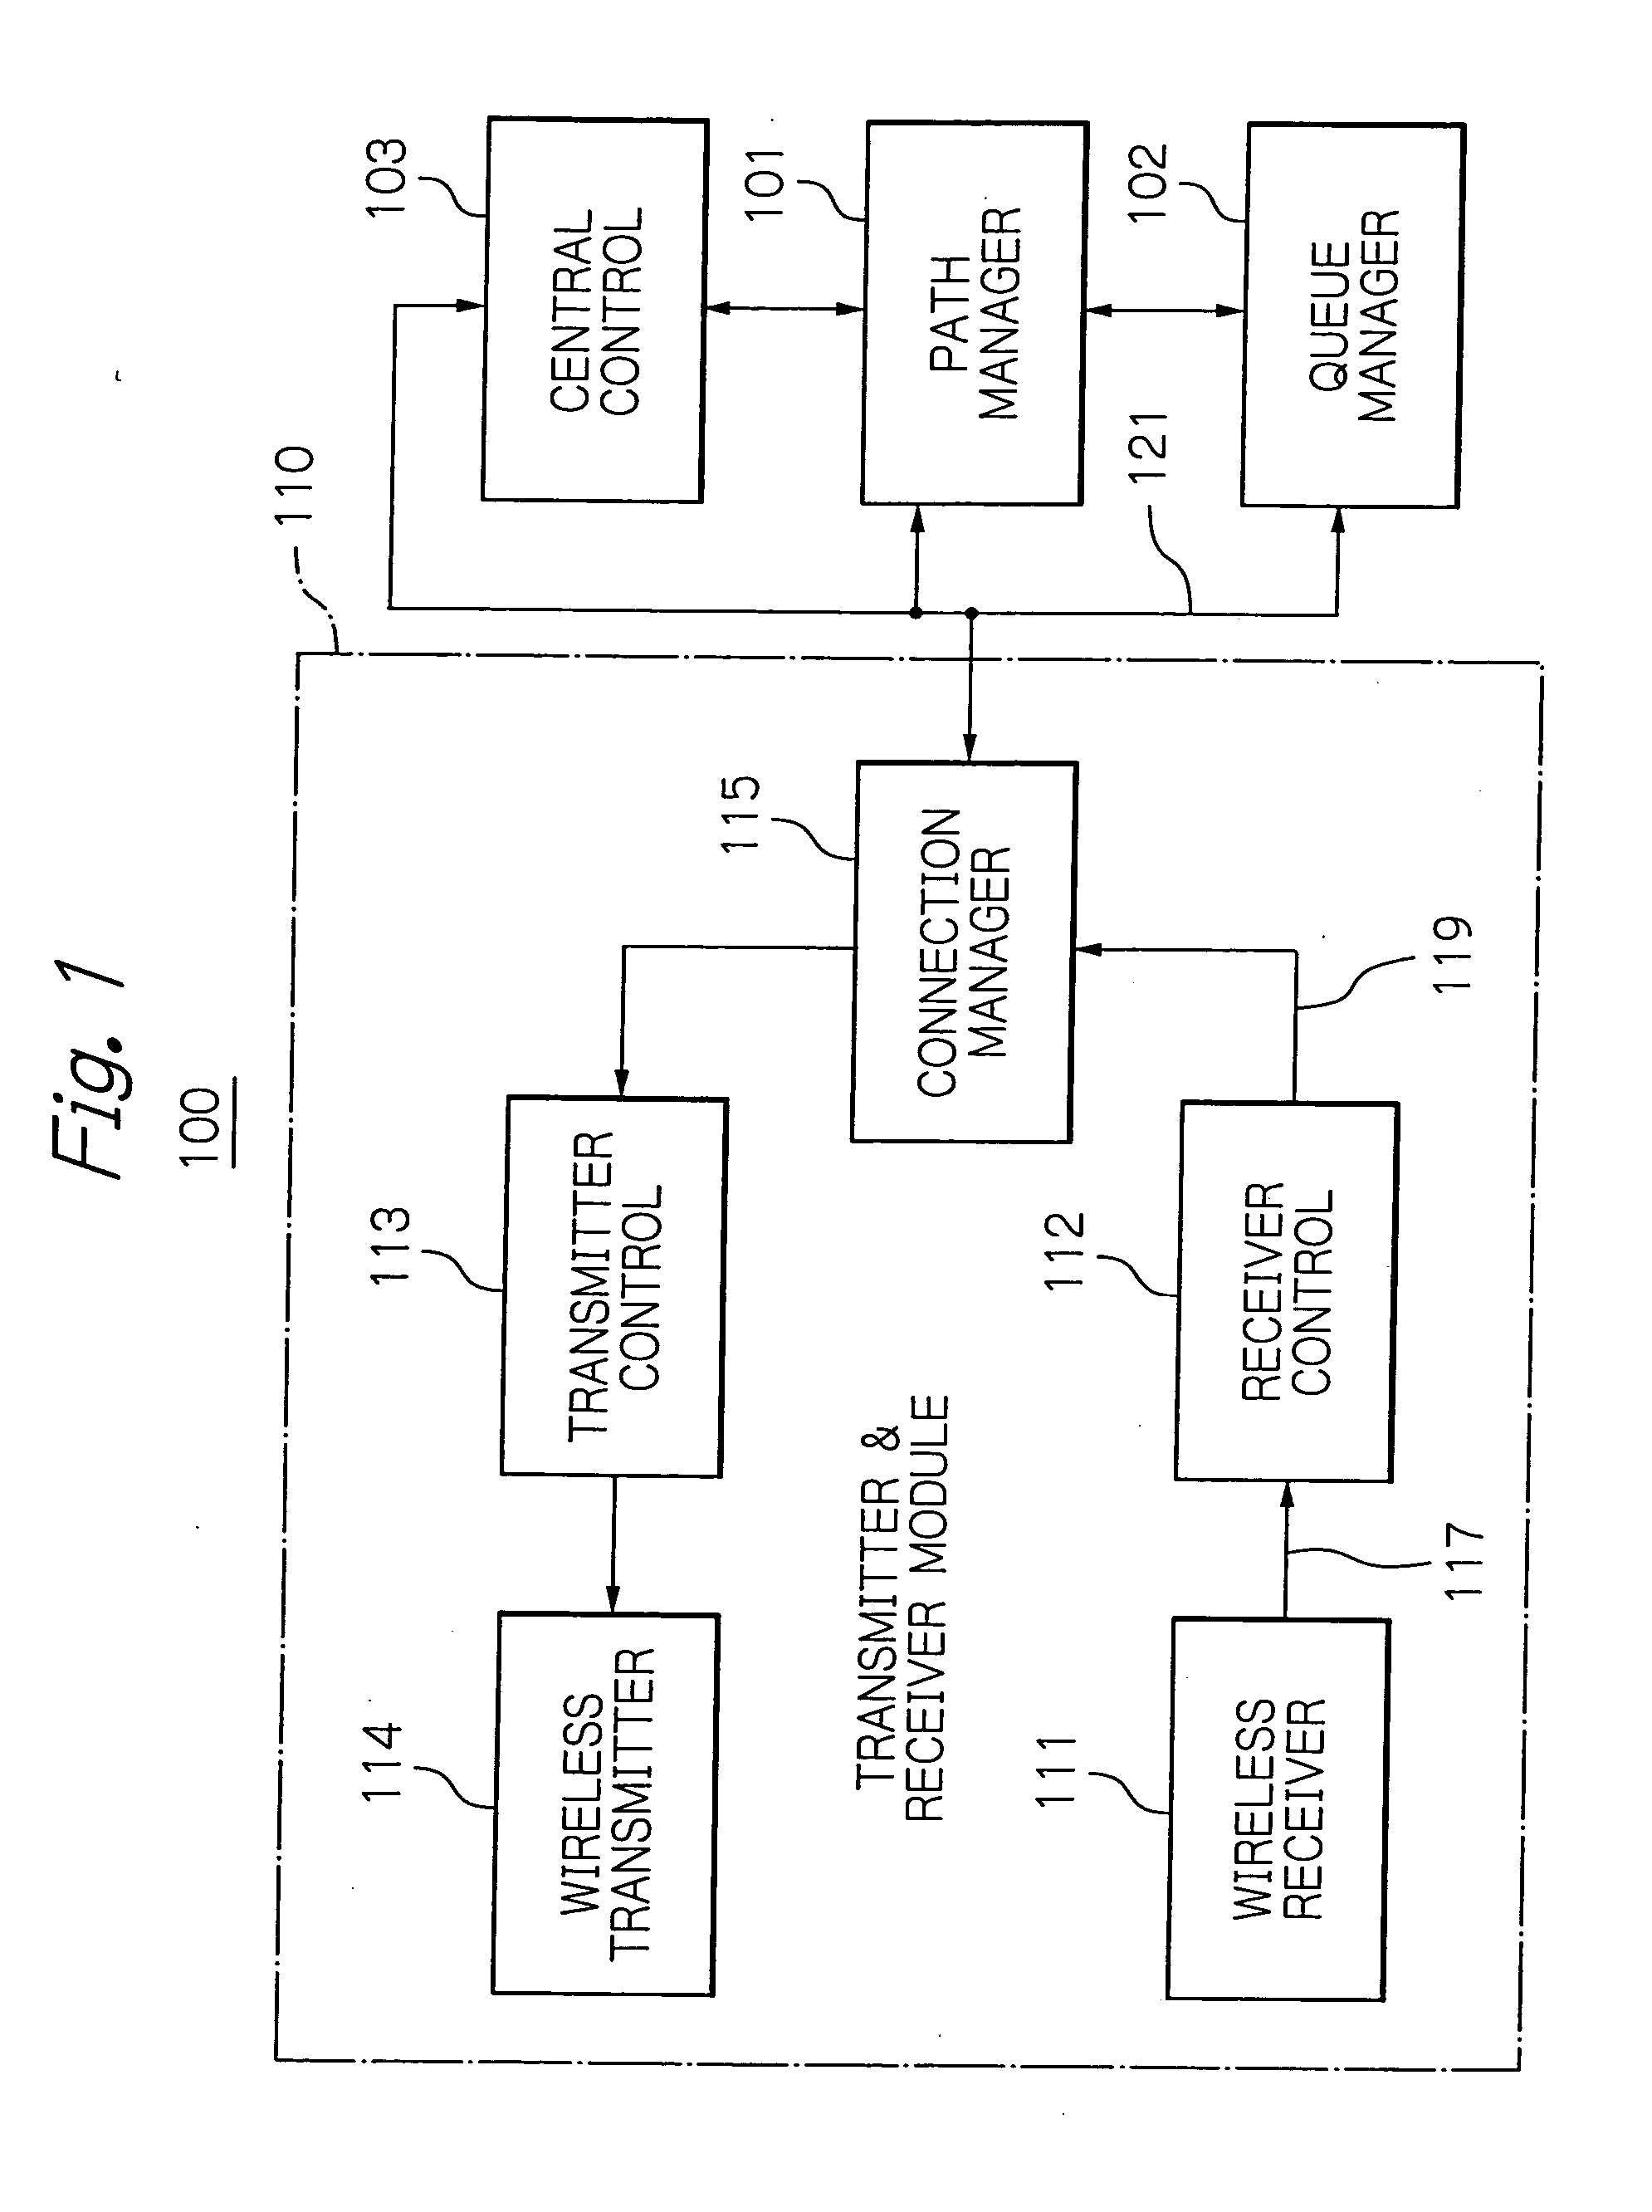 Network configuration method allotting channels to wireless stations by generating a broadcast tree